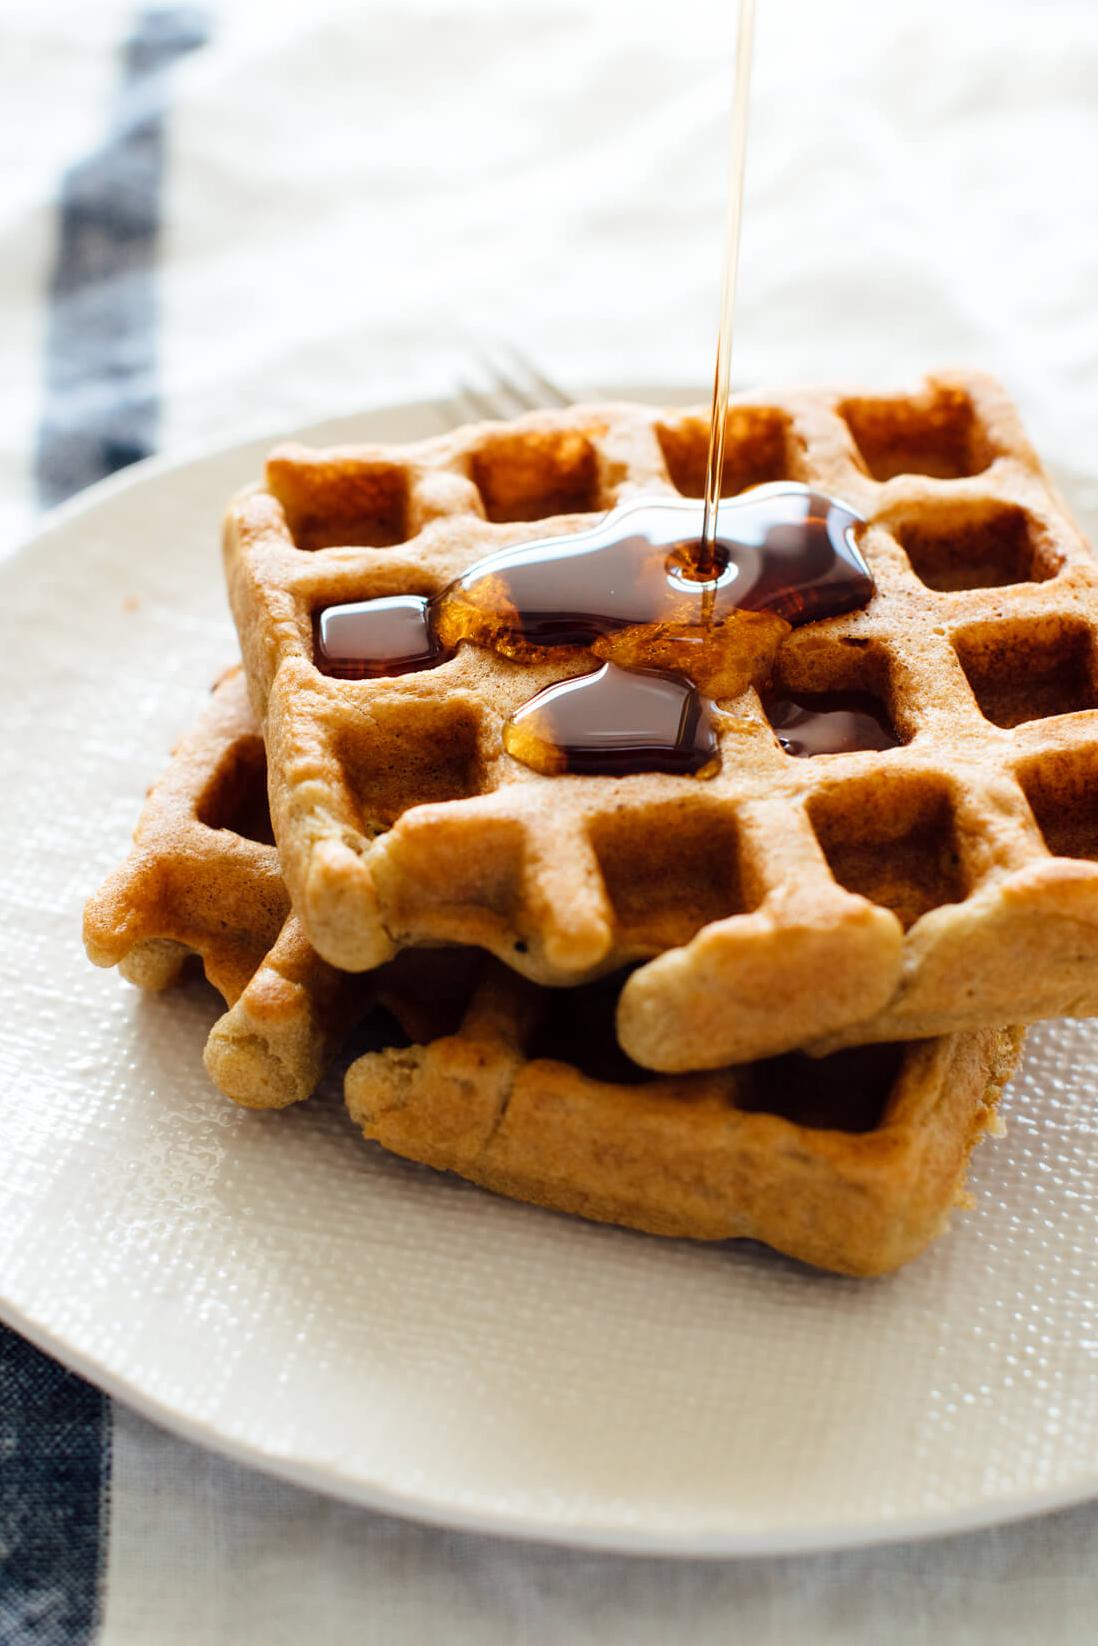  Get cozy with a plate of gluten-free waffles on a cool morning.